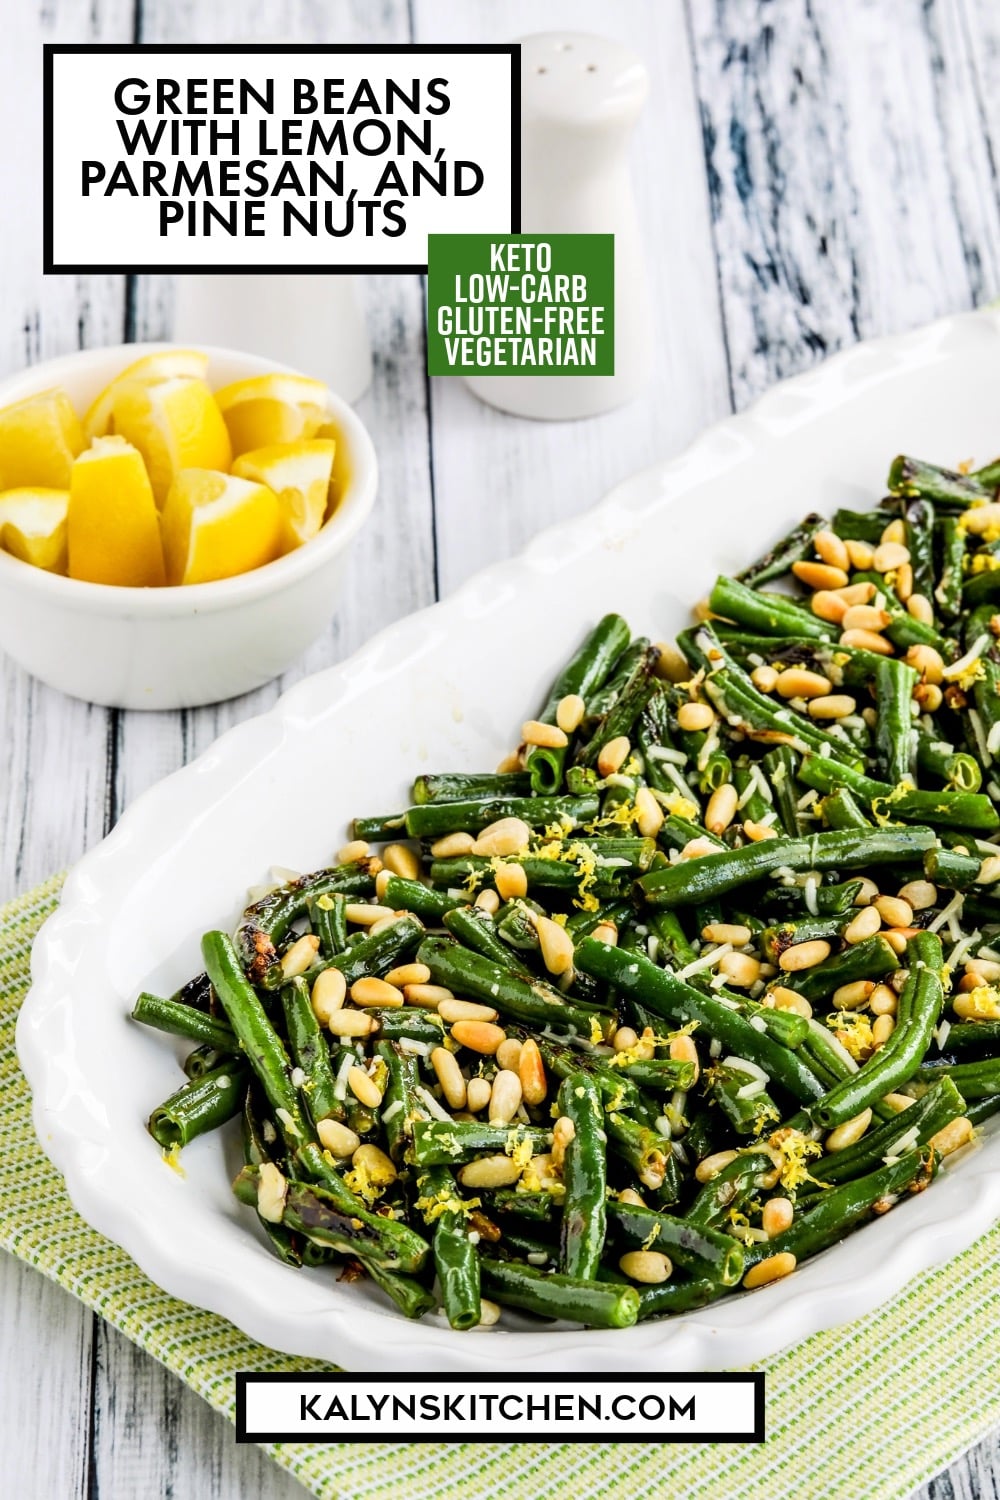 Pinterest image of Green Beans with Lemon, Parmesan, and Pine Nuts